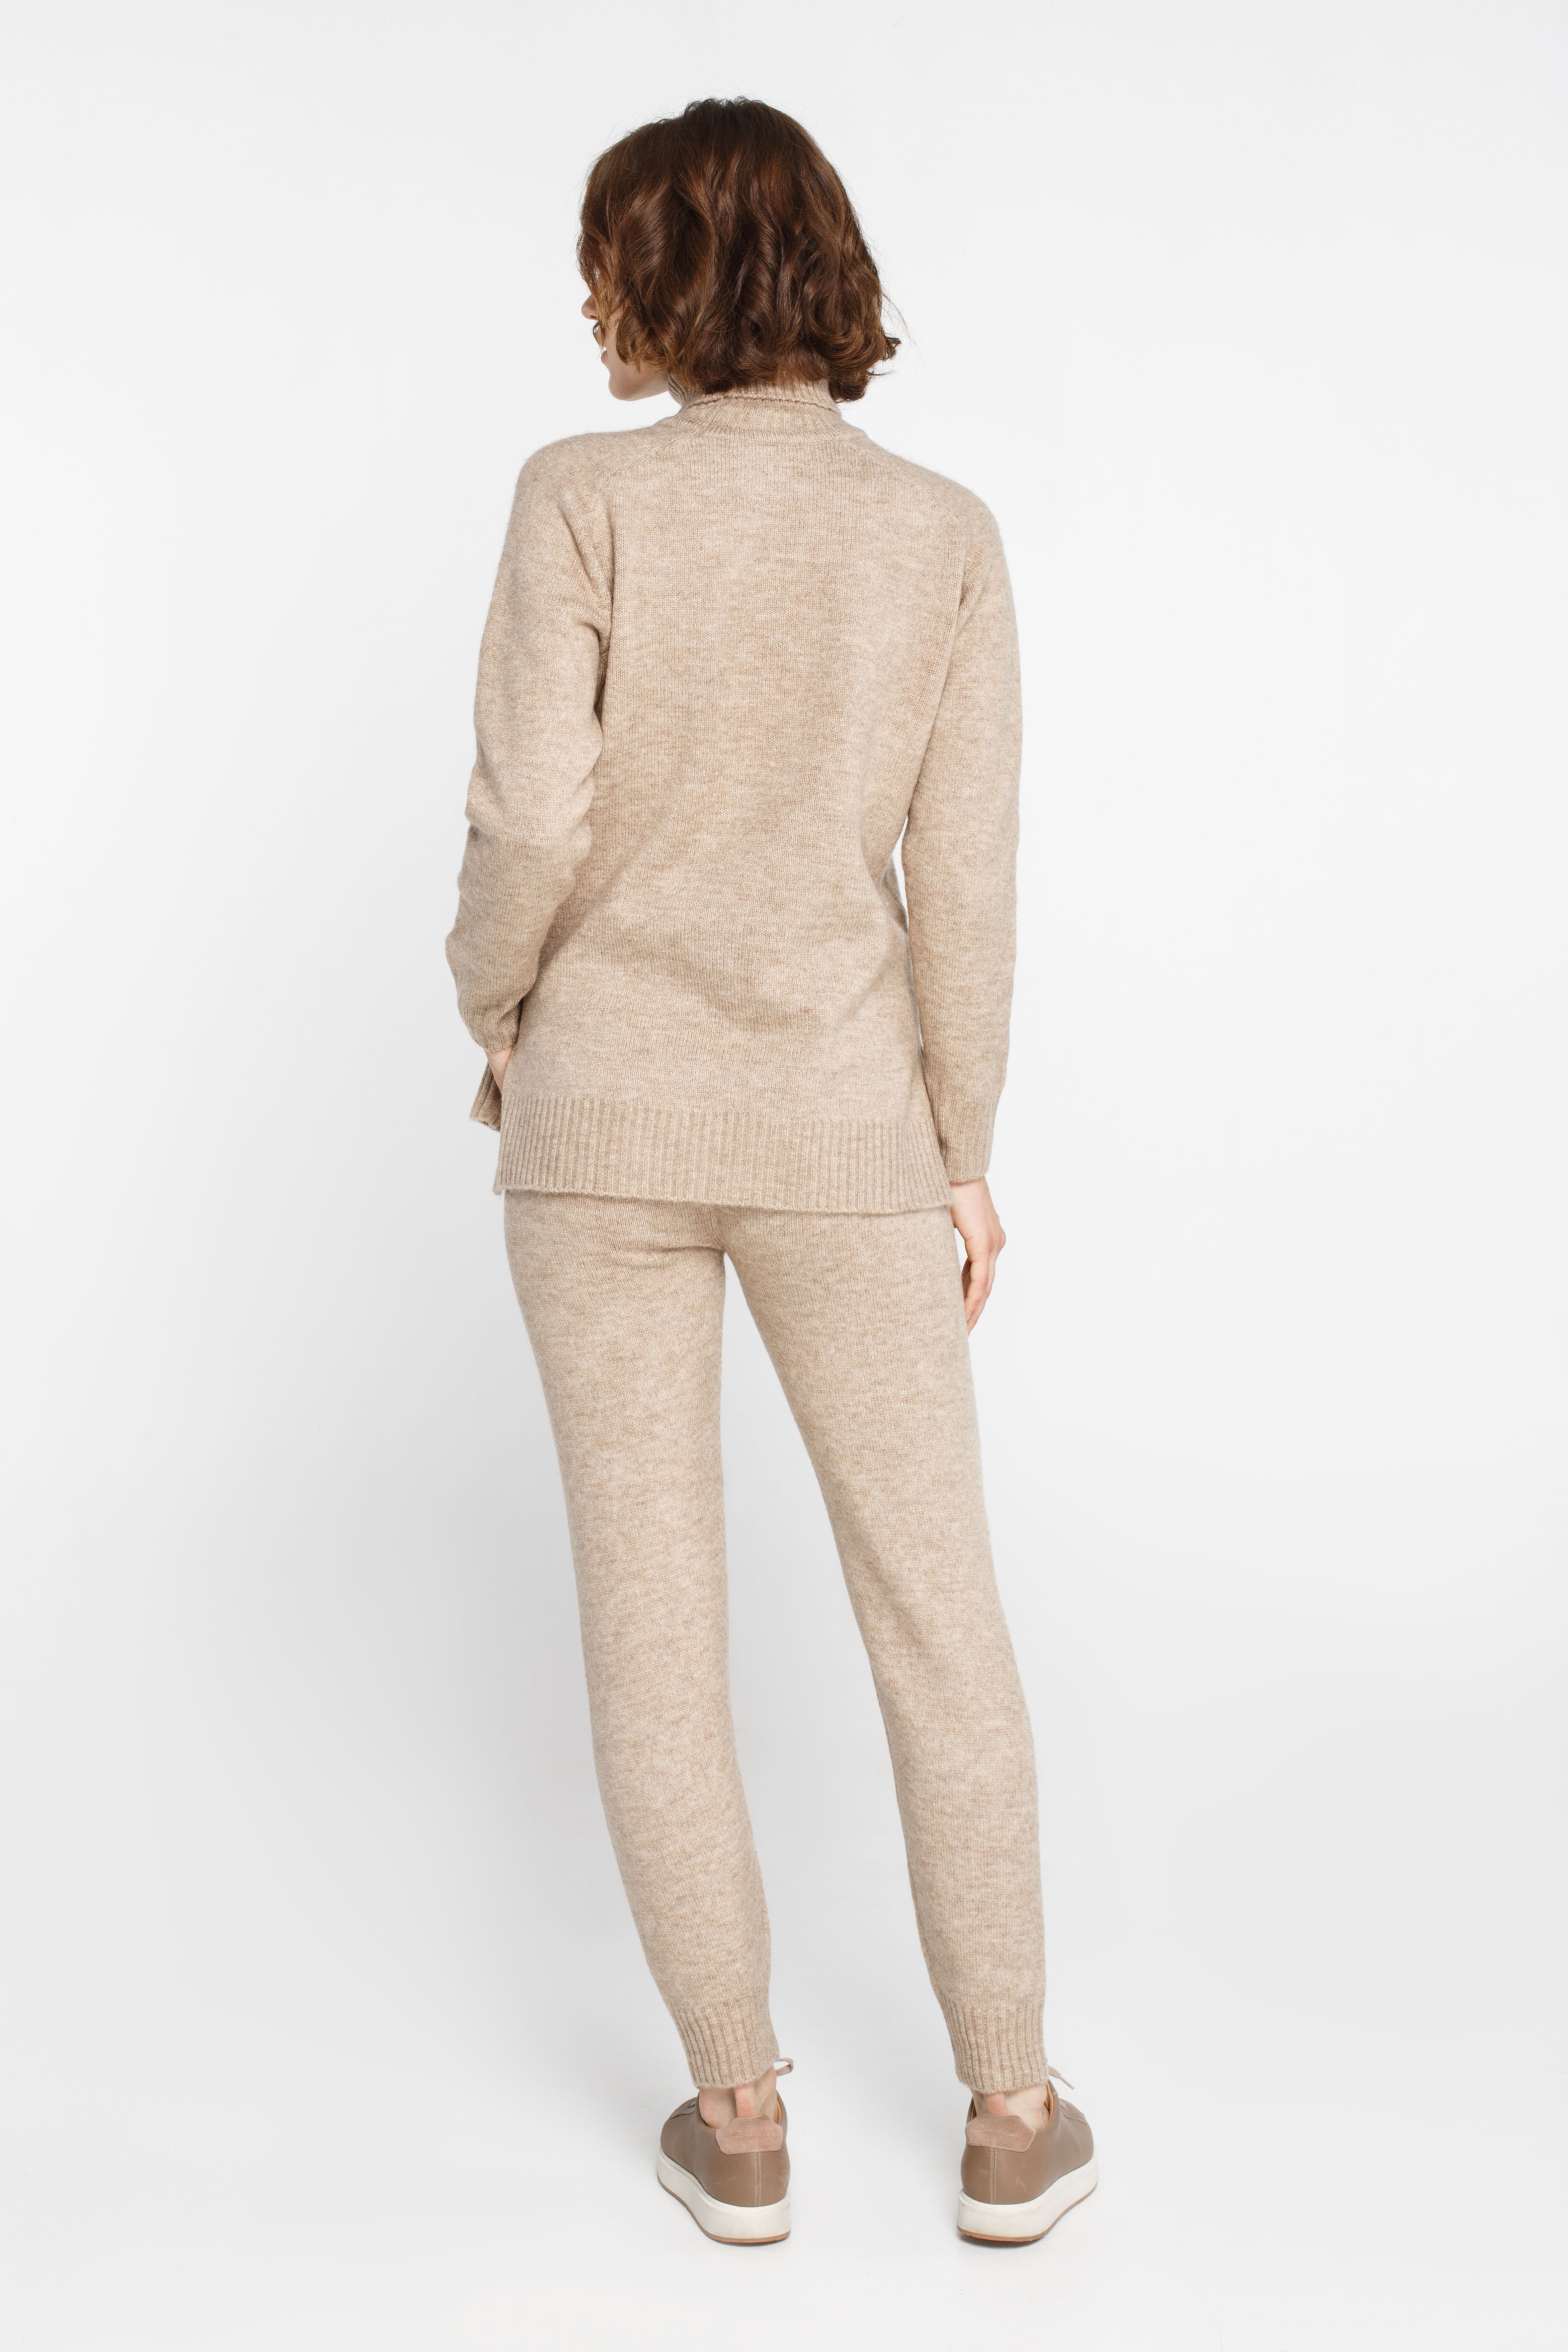 Knit beige jogging pants with wool, photo 5